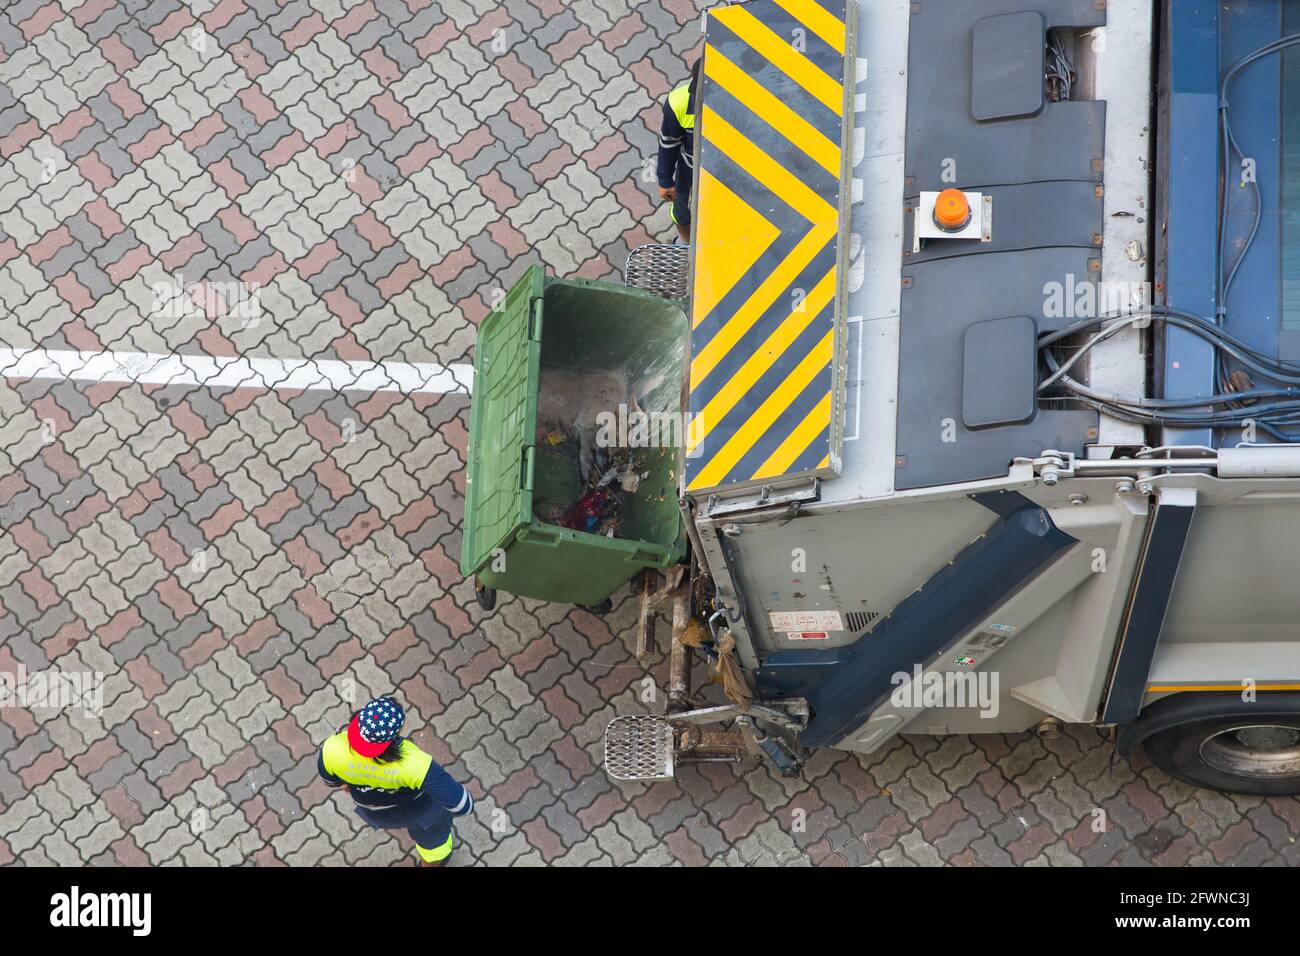 Aerial view of a rubbish truck using hydraulic-powered to lift up the bin to unload the rubbish into the interior, only need two operators to work. Stock Photo